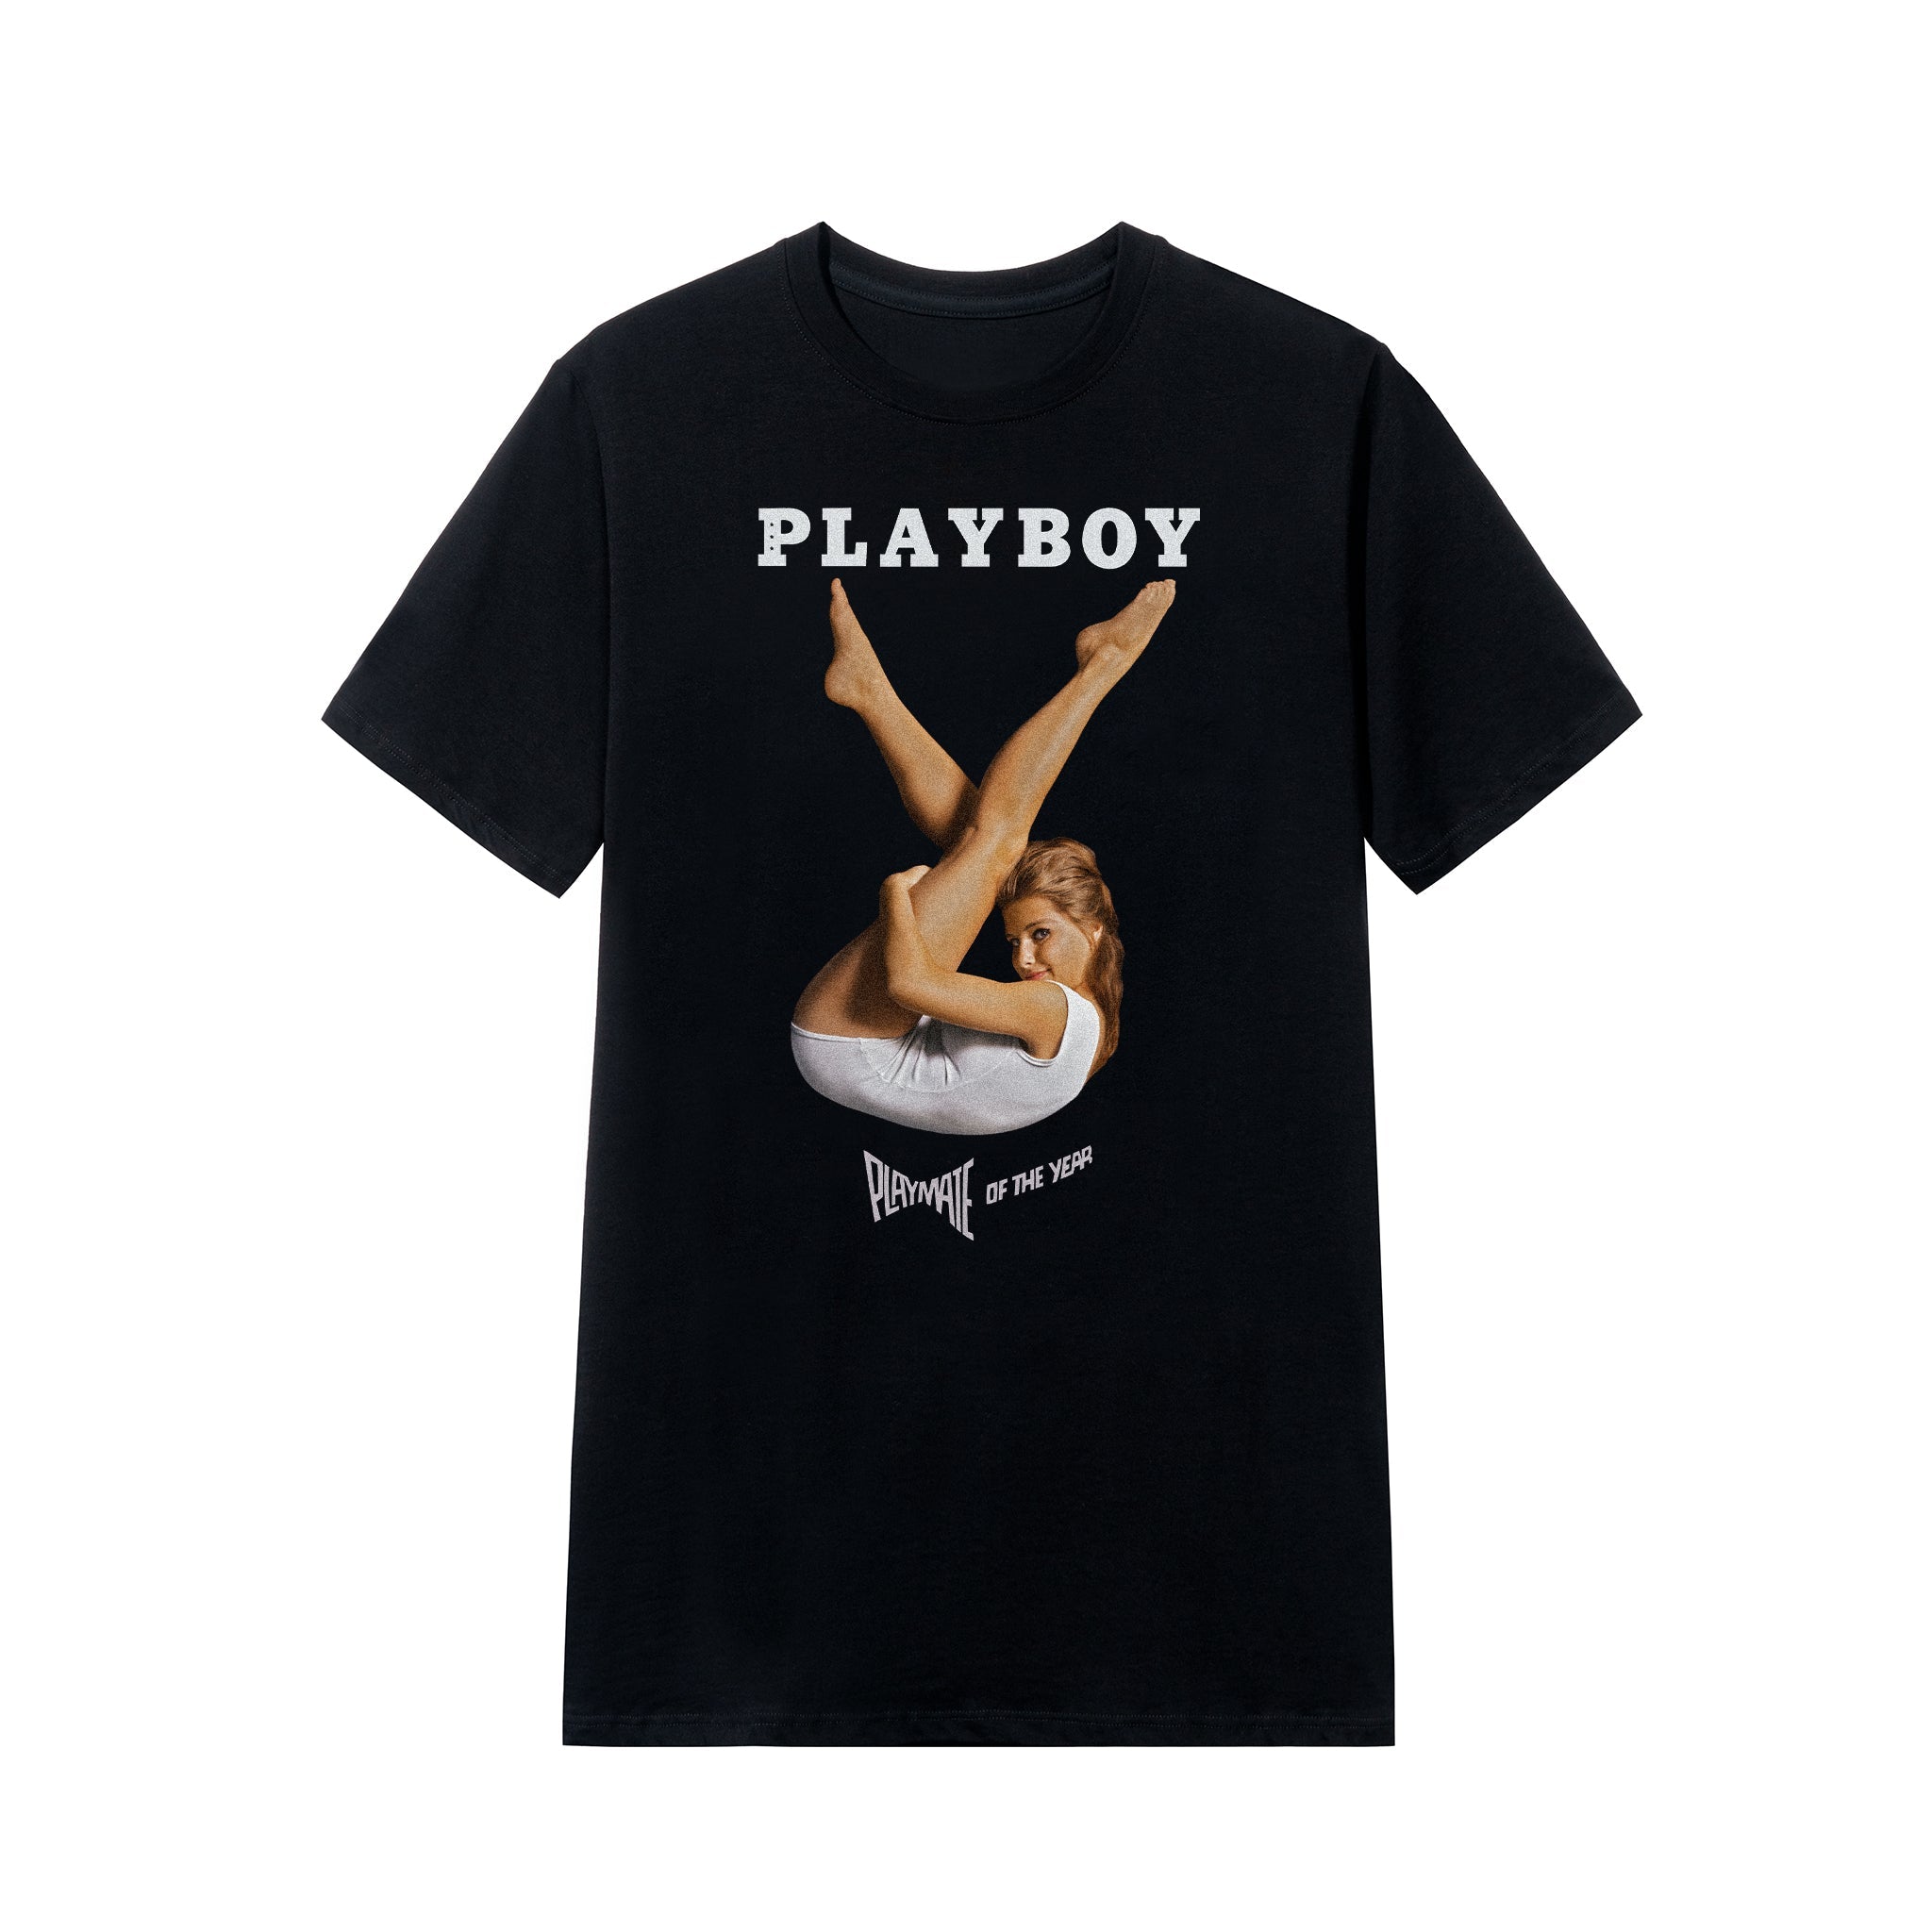 May 1964 Playboy Cover T-Shirt